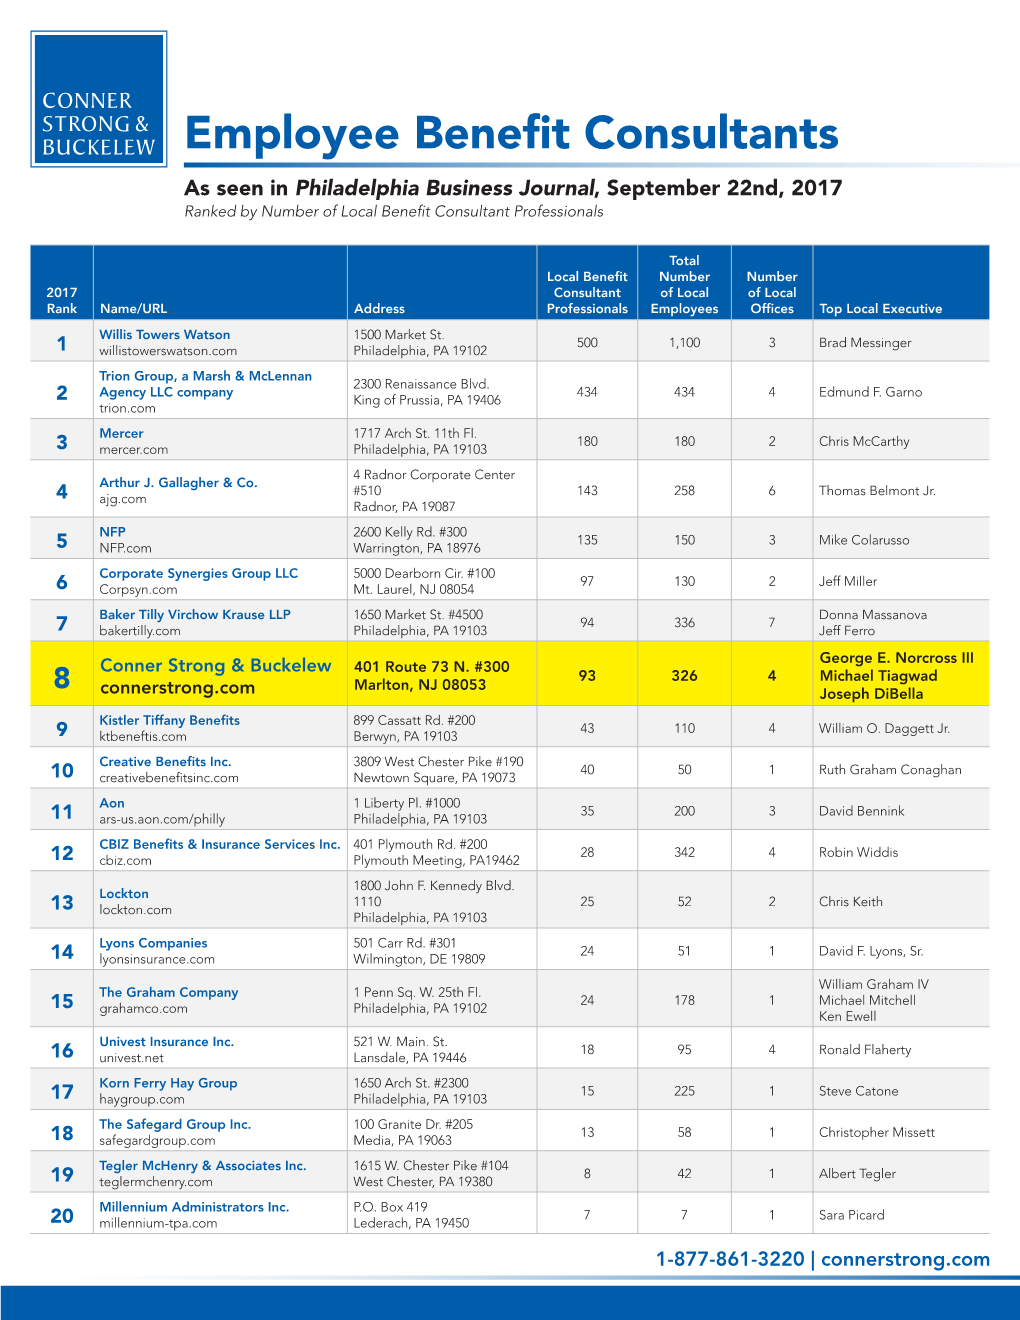 Employee Benefit Consultants As Seen in Philadelphia Business Journal, September 22Nd, 2017 Ranked by Number of Local Benefit Consultant Professionals